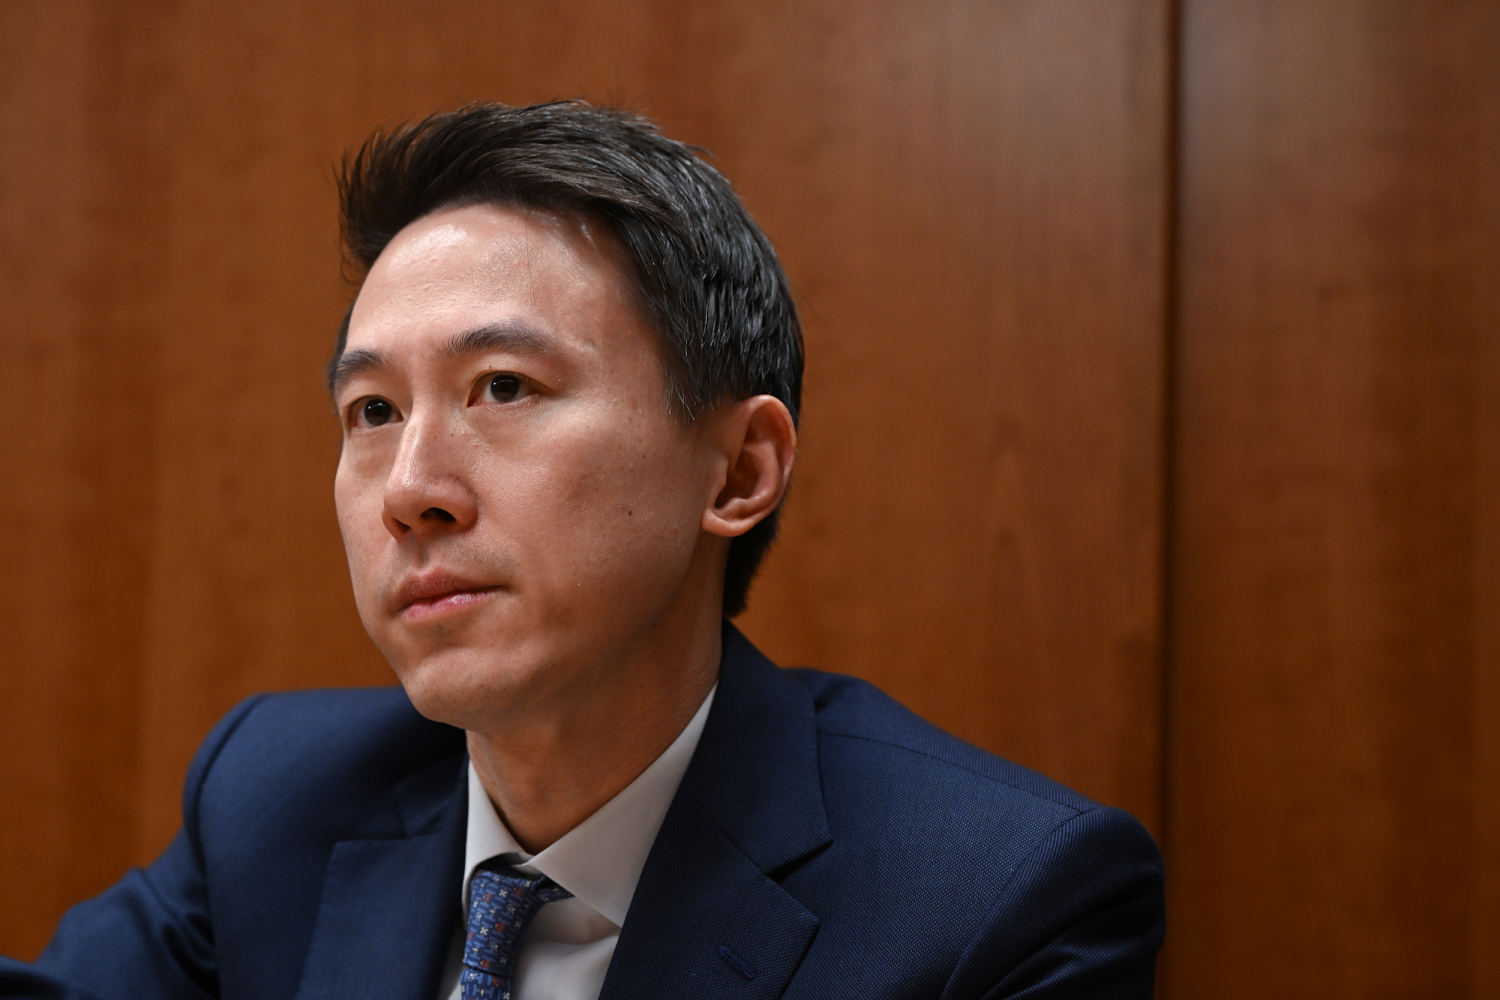 TikTok CEO Shou Chew says fight over ban will head to court: 'We aren't going anywhere'